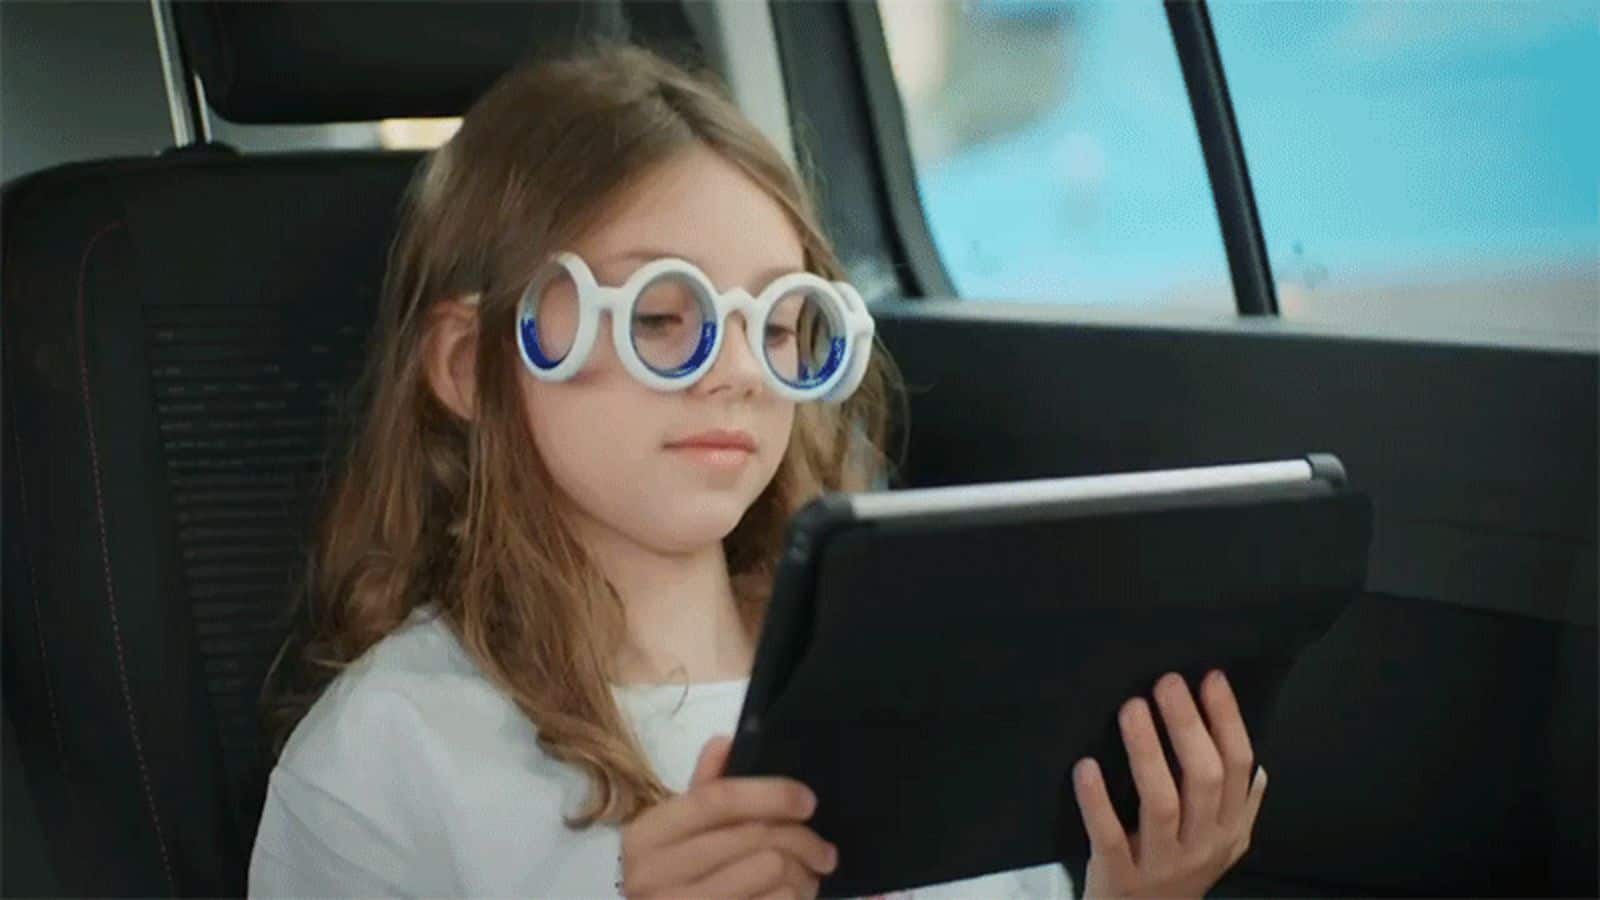 Say Goodbye To Motion Sickness: New-Age Goggles Claimed To Have Helped Sufferers 95% Of The Time